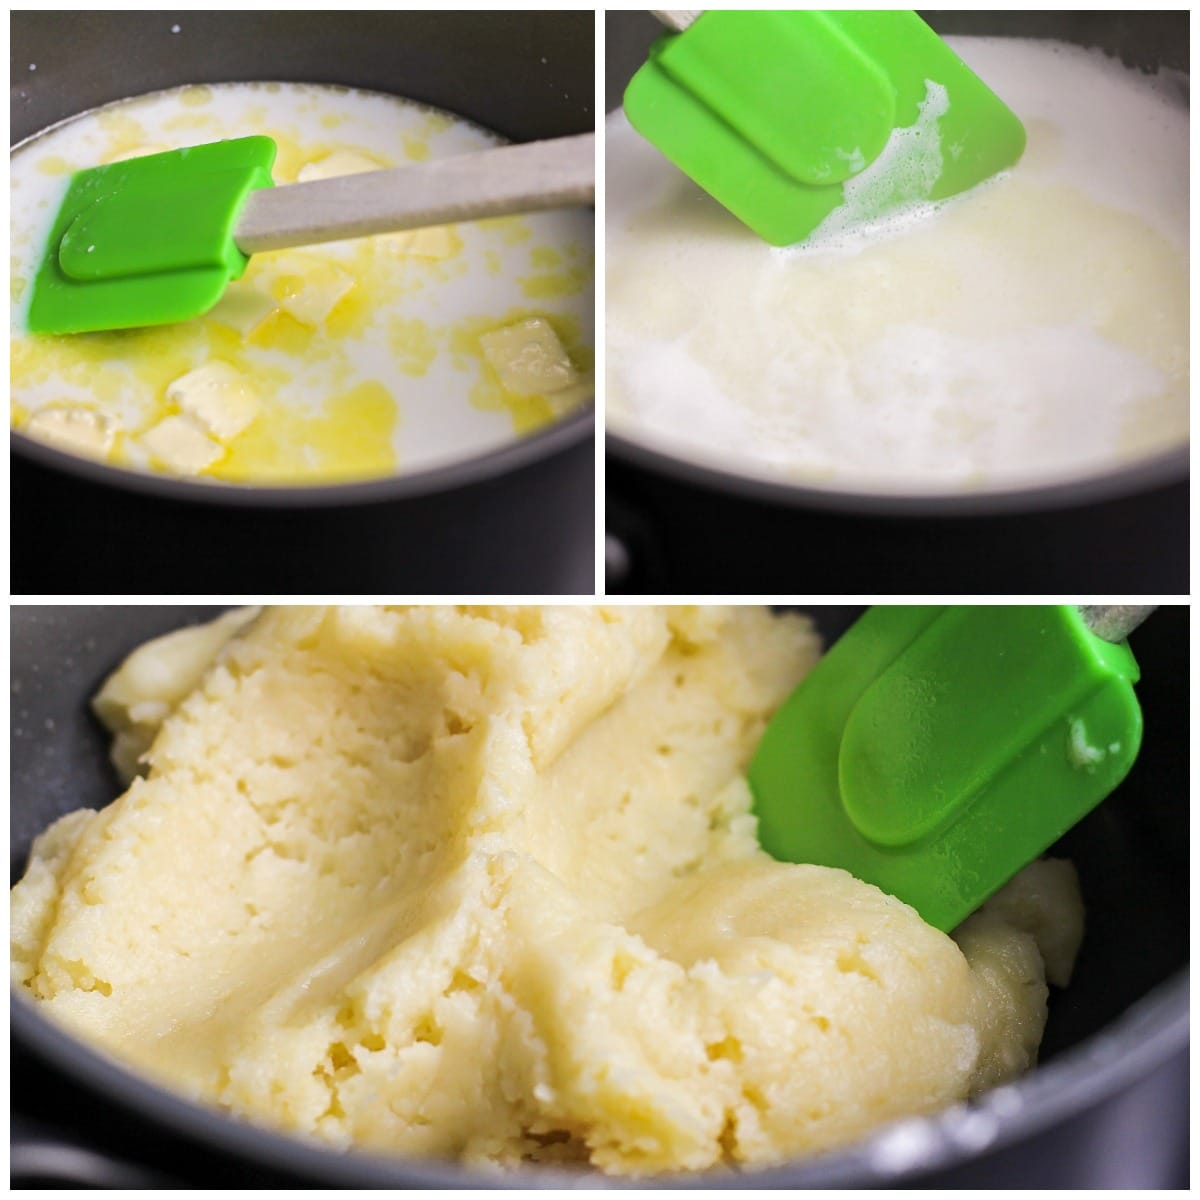 Step by step pictures of making cheese puff dough